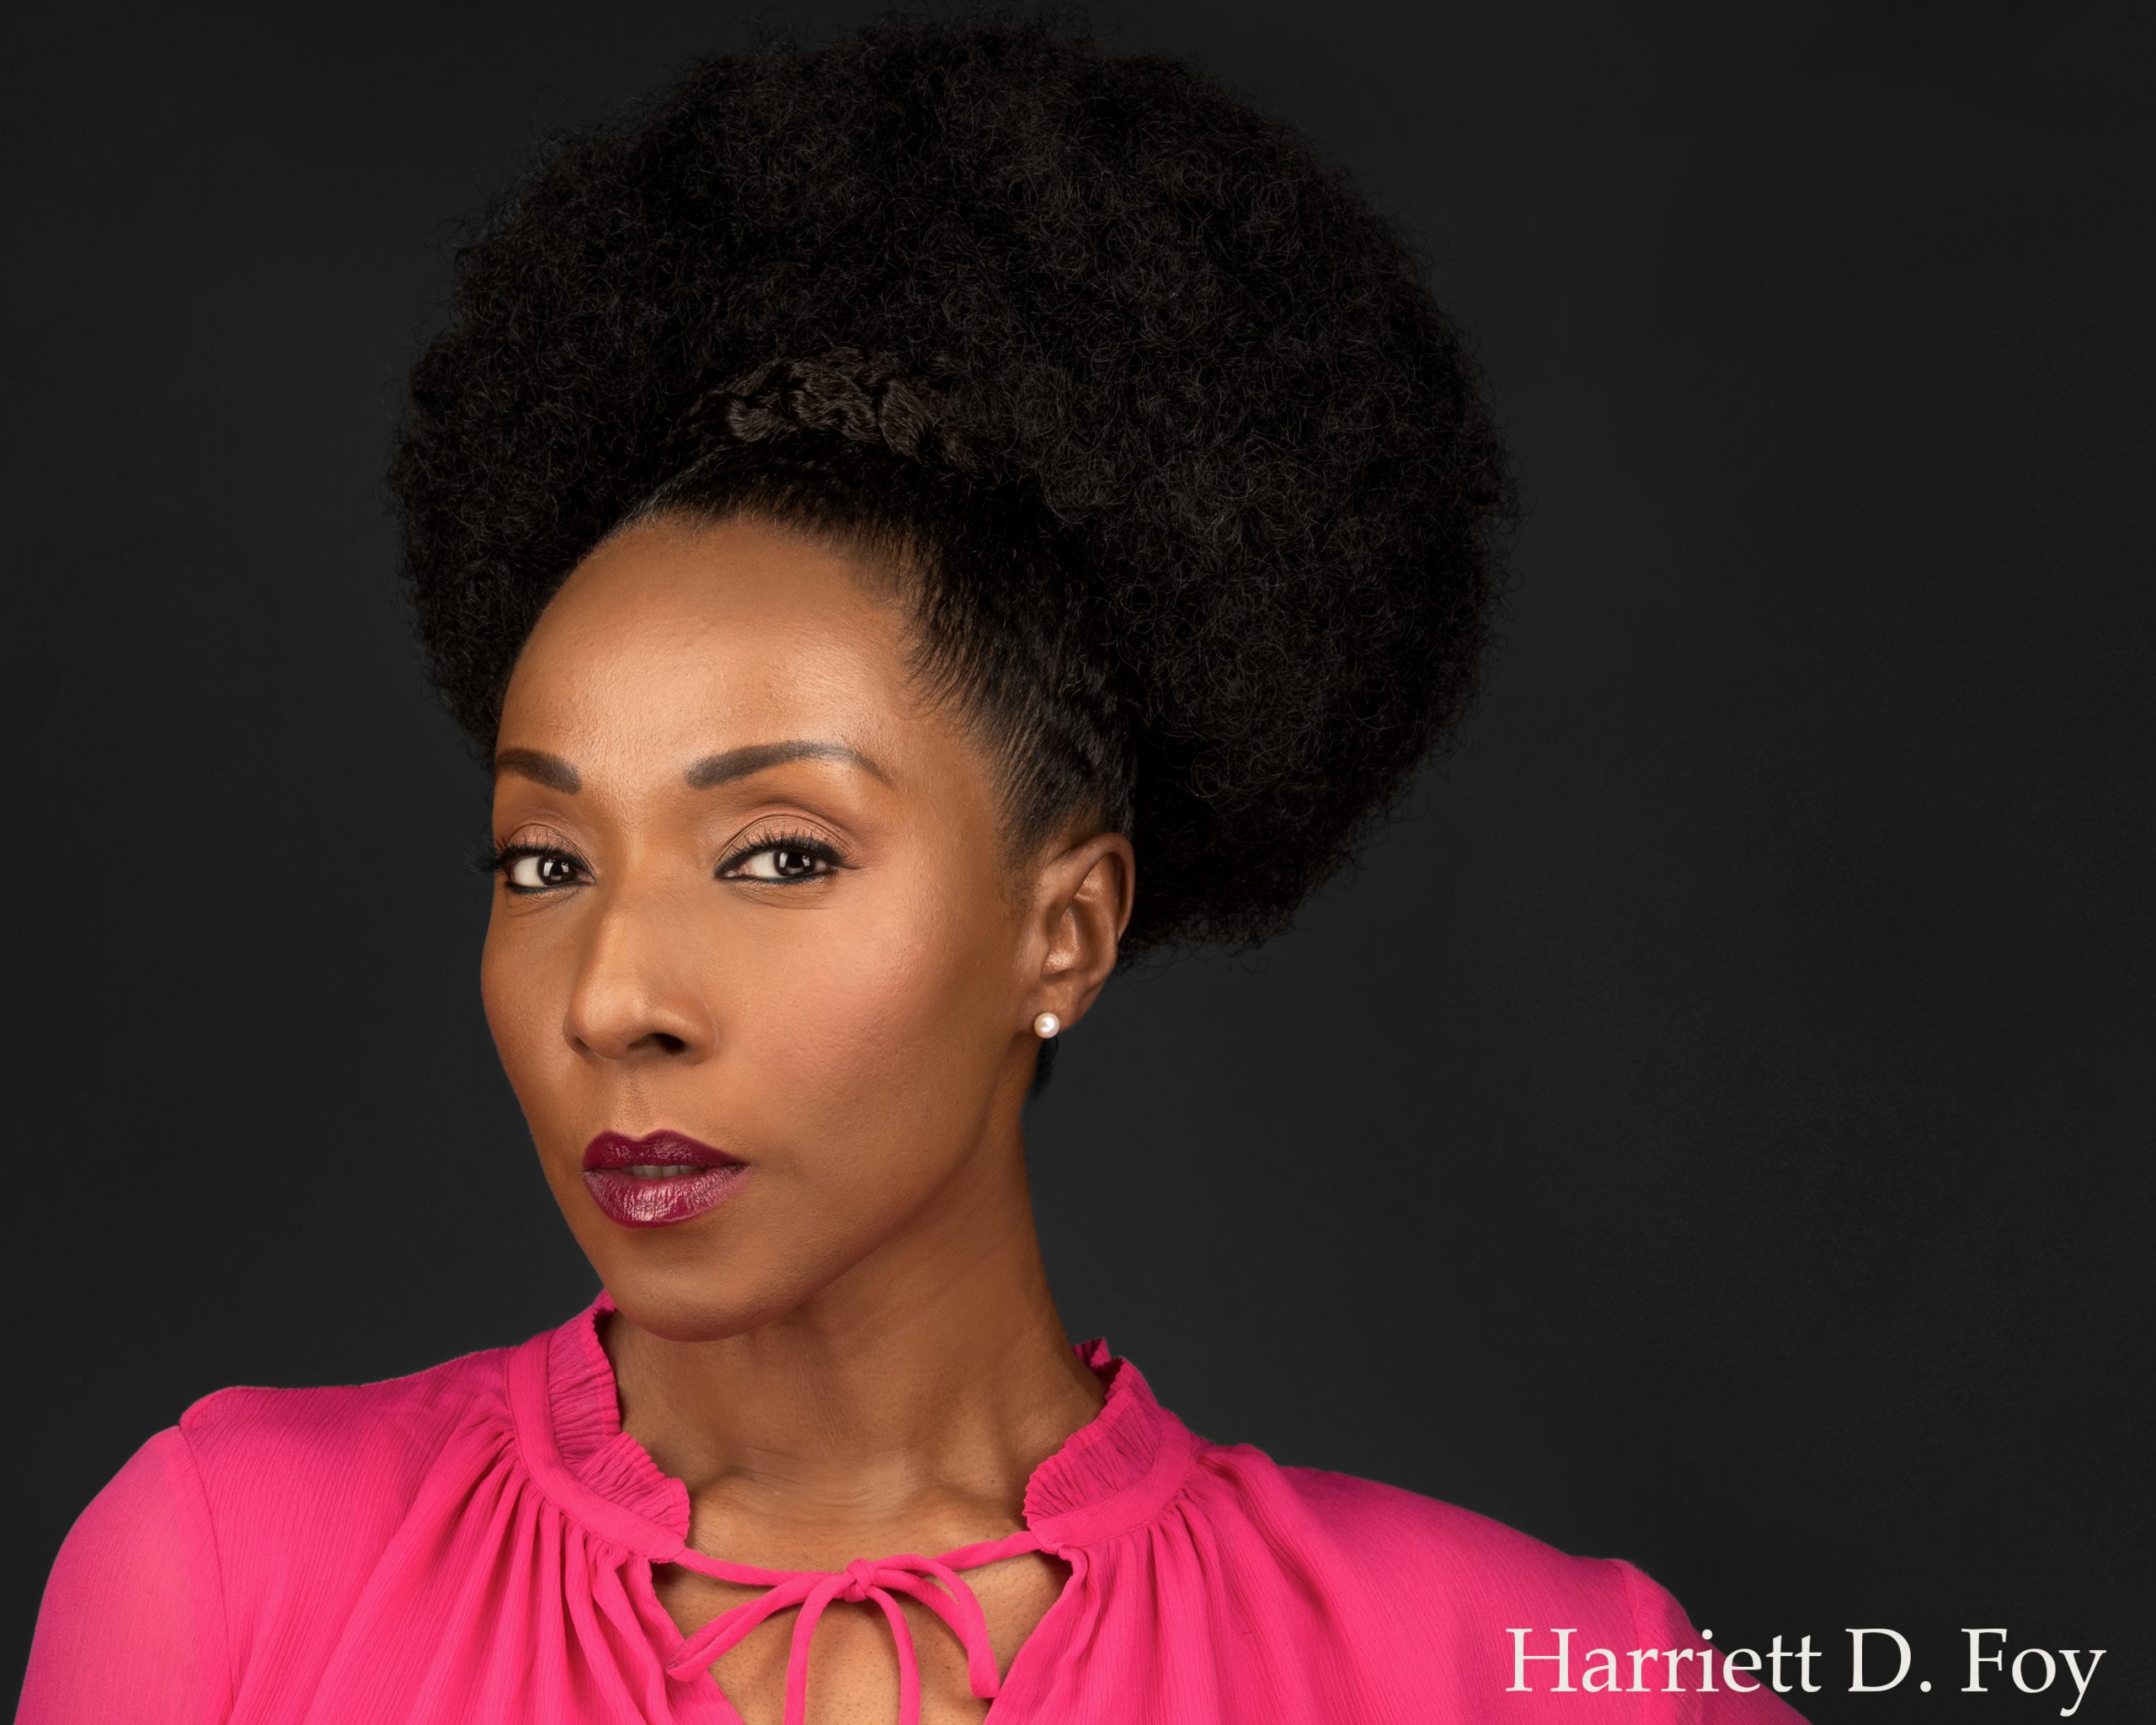 Harriett D. Foy currently stars as Patrice Woodbine on the hit STARZ show P-Valley. She is an award-winning actress who has performed for audiences from Broadway to Dubai.